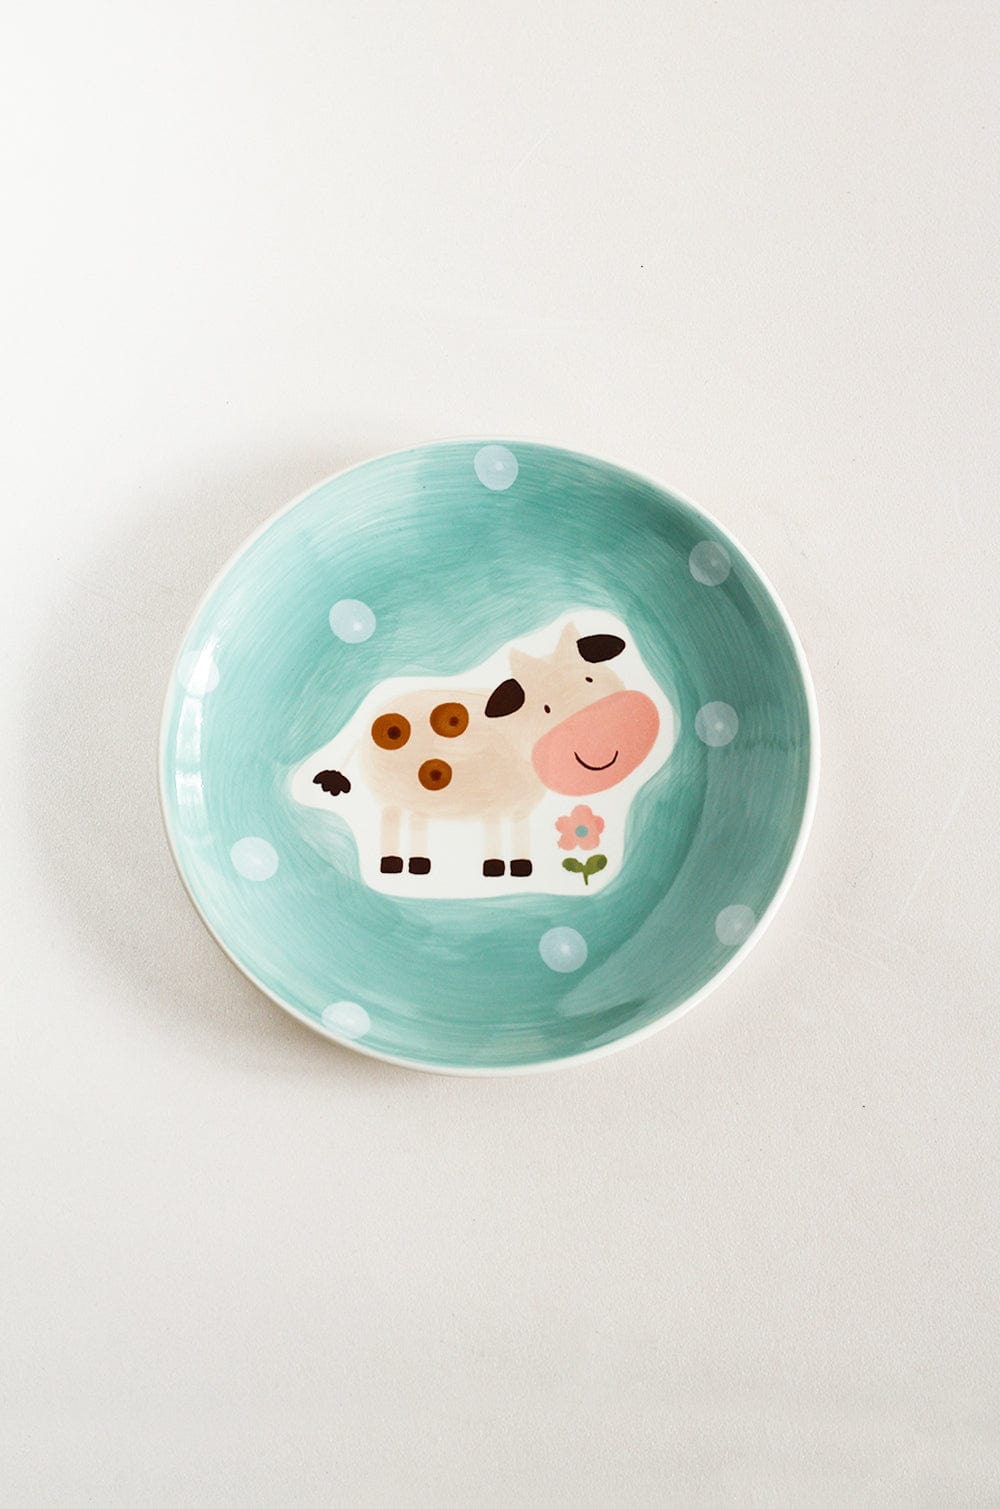 Moo Quirky Farm Handpainted Wall Plate